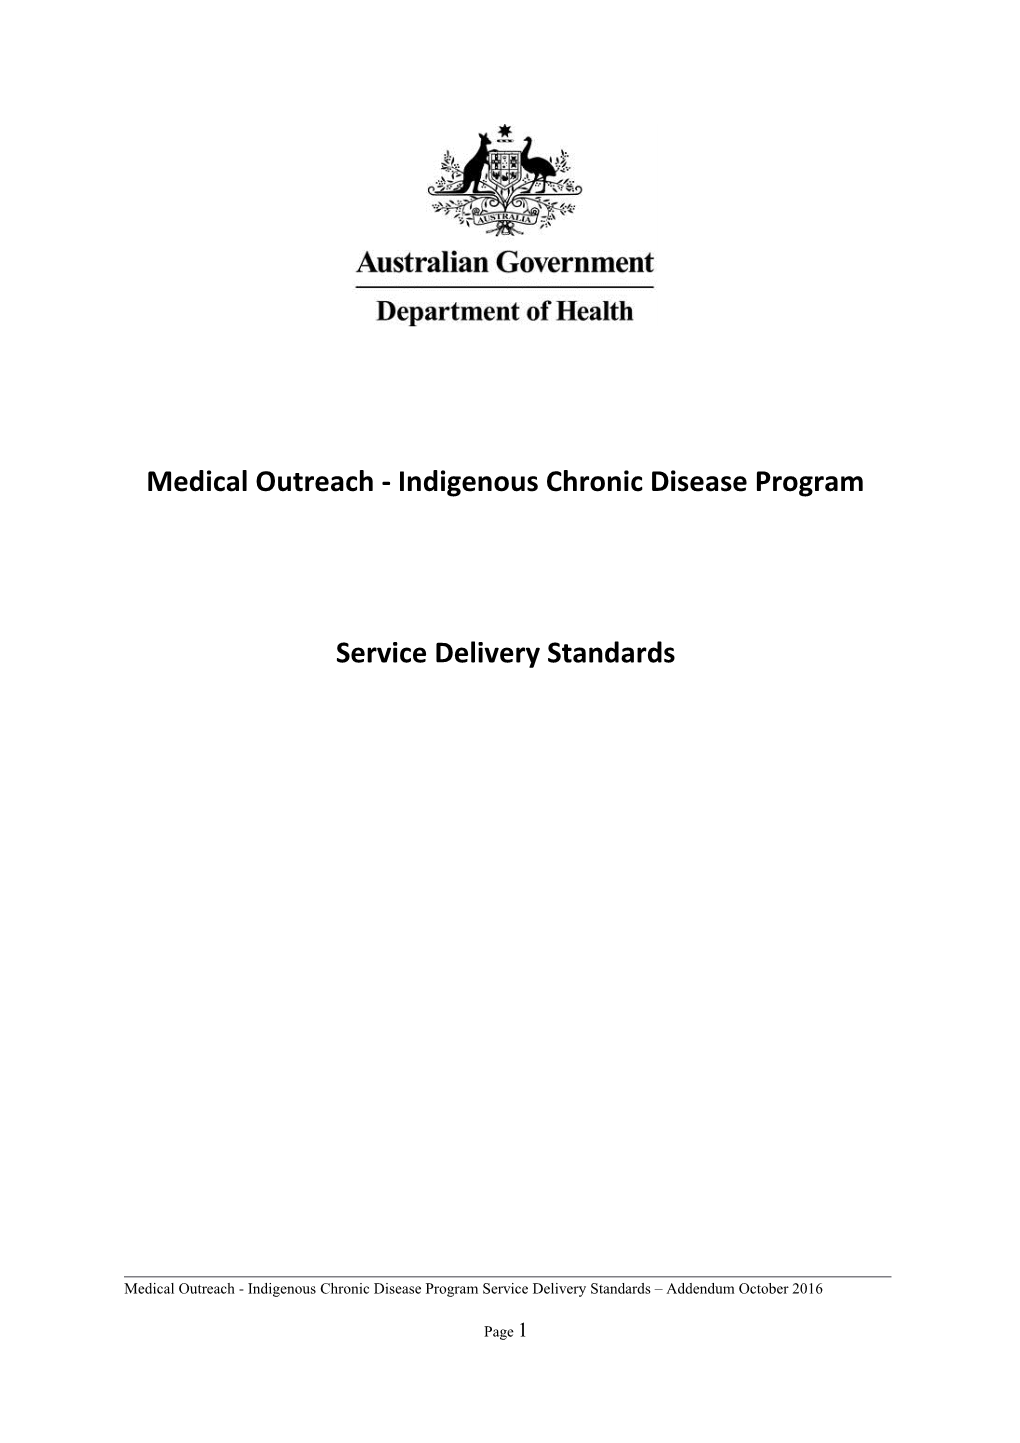 Medical Outreach - Indigenous Chronic Disease Program Service Delivery Standards